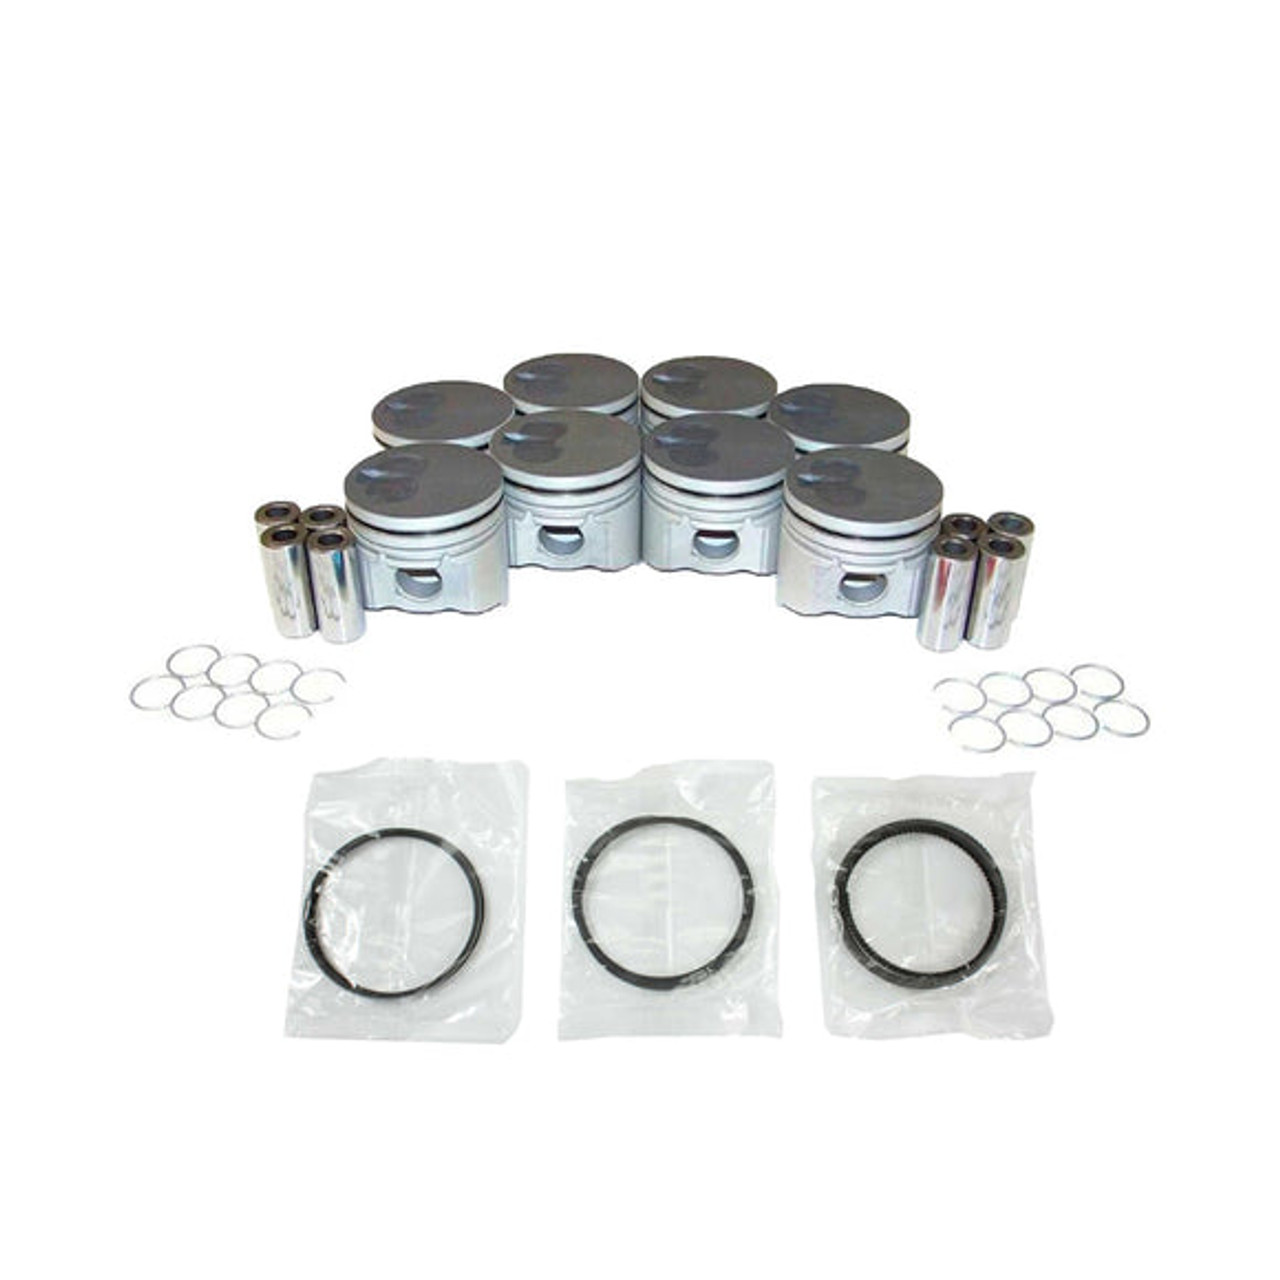 Piston Set with Rings - 2002 GMC C3500HD 6.5L Engine Parts # PRK3195ZE361